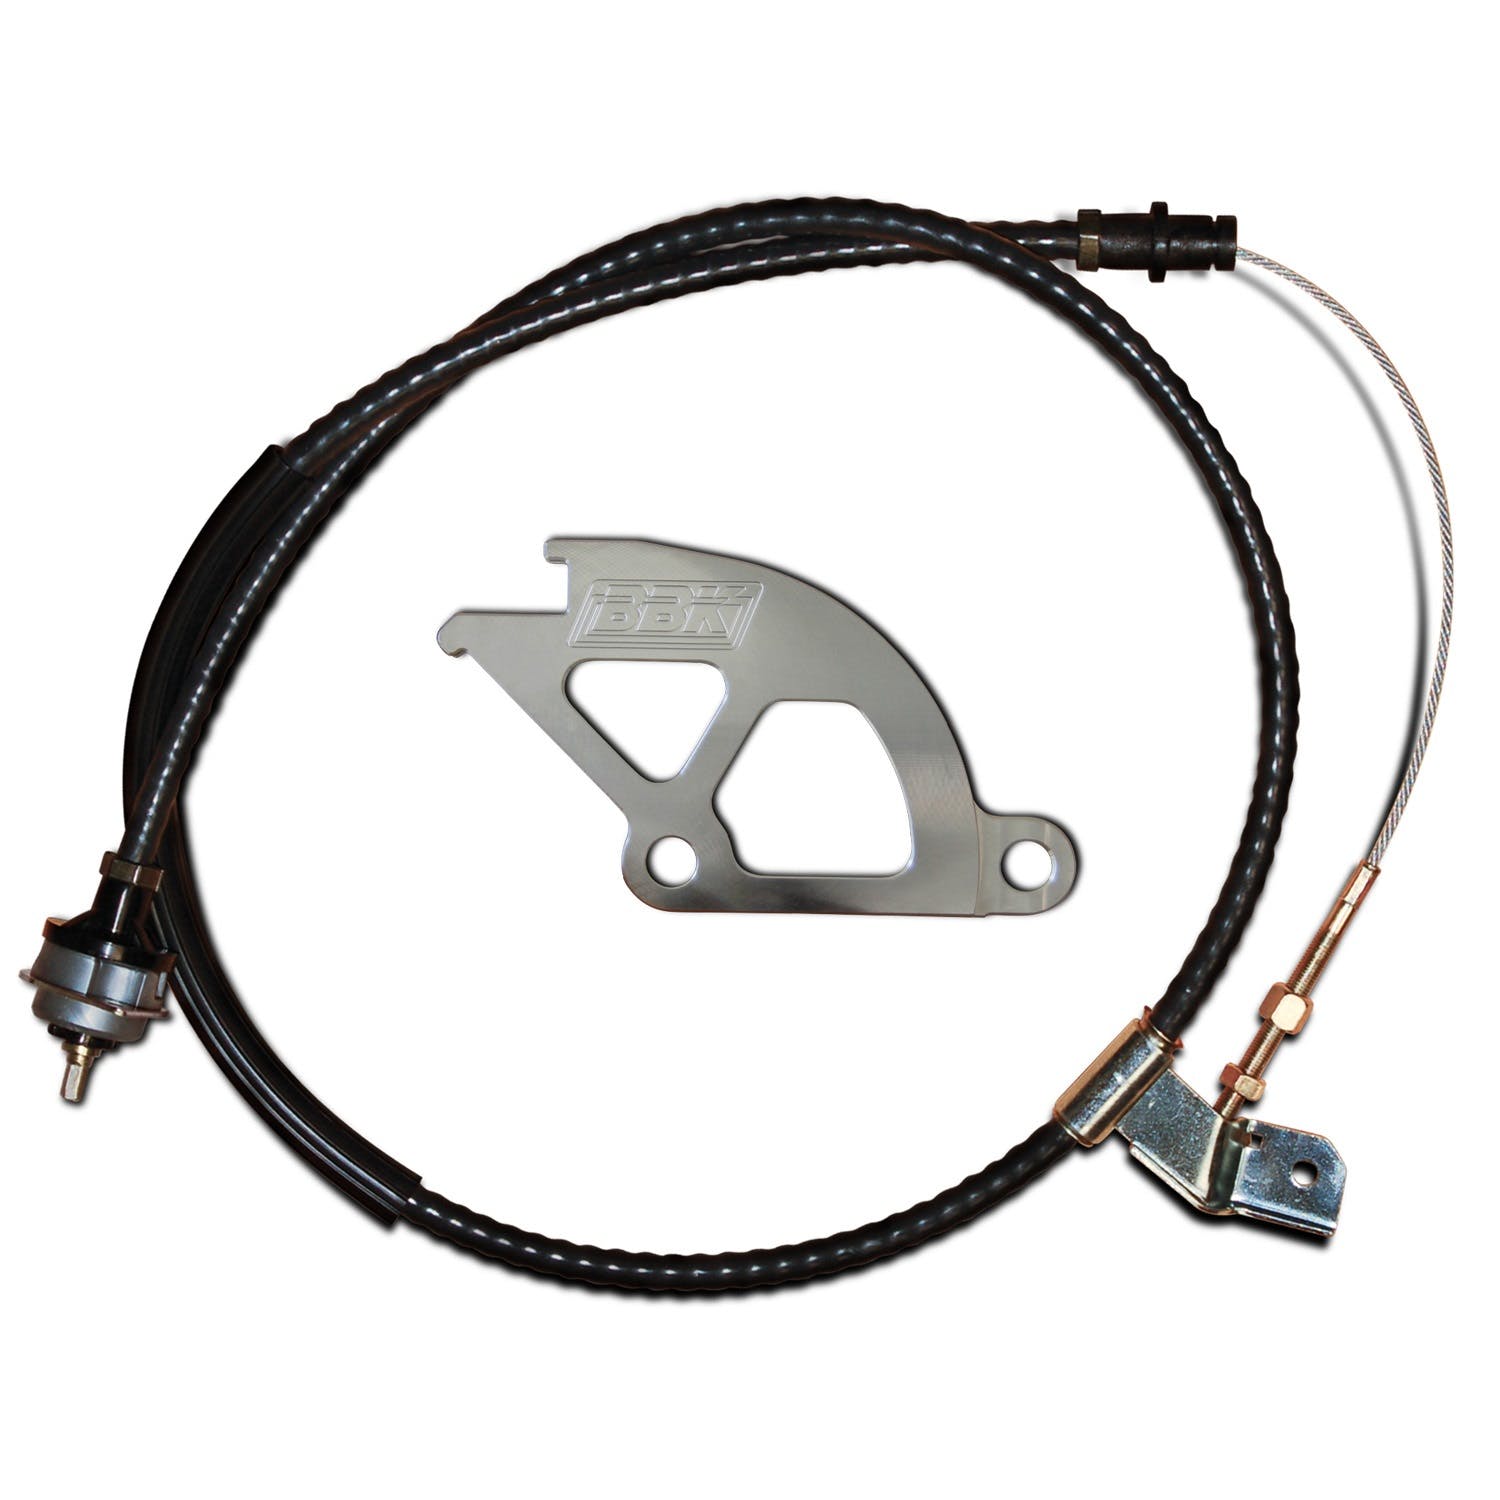 BBK Performance Parts 1609 Clutch Quadrant And Cable Kit